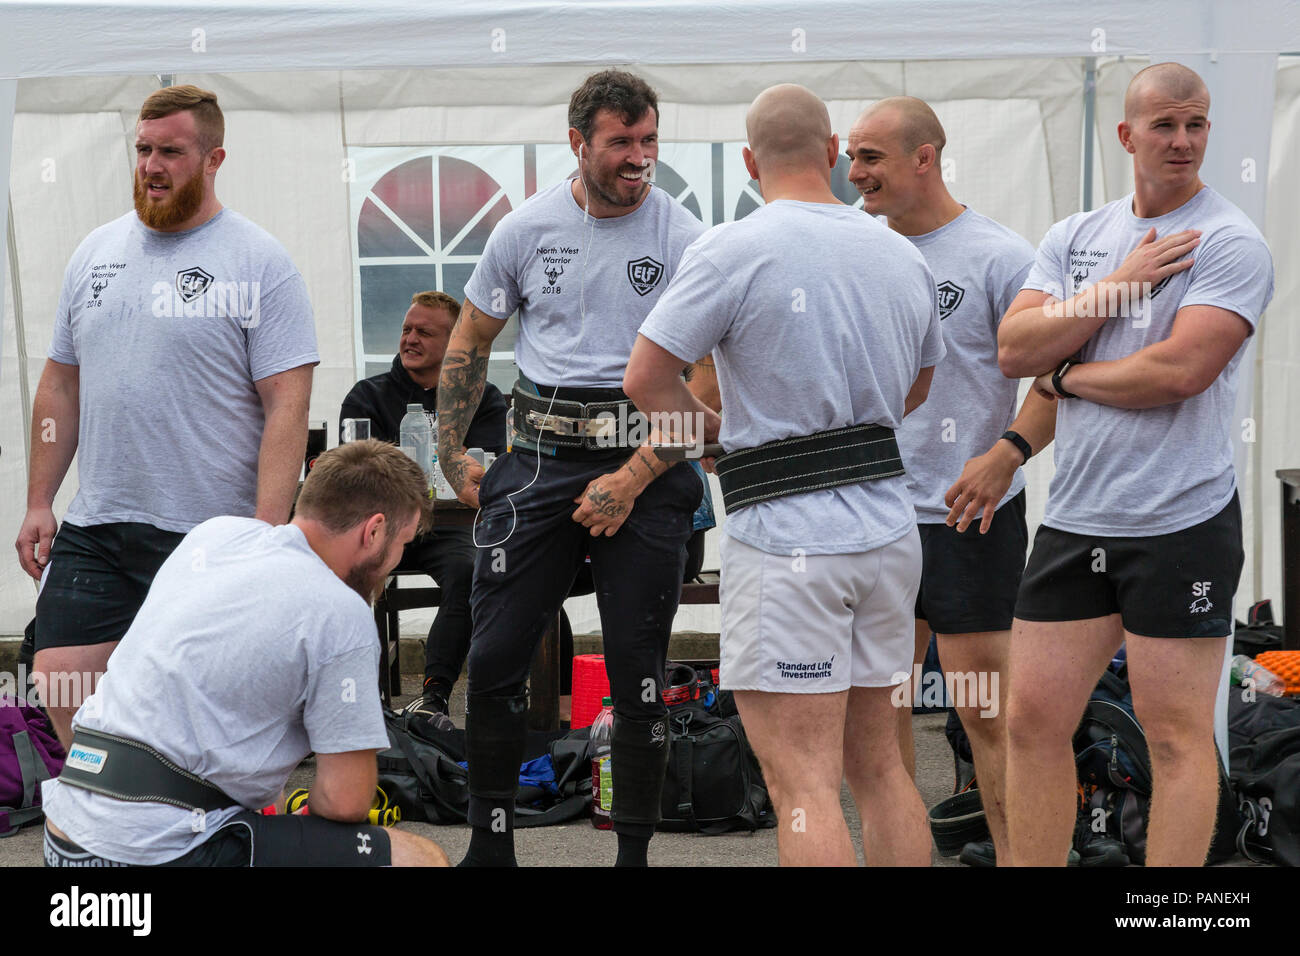 North West Warrior Weightlifting competition, St Helens, Merseyside UK Stock Photo